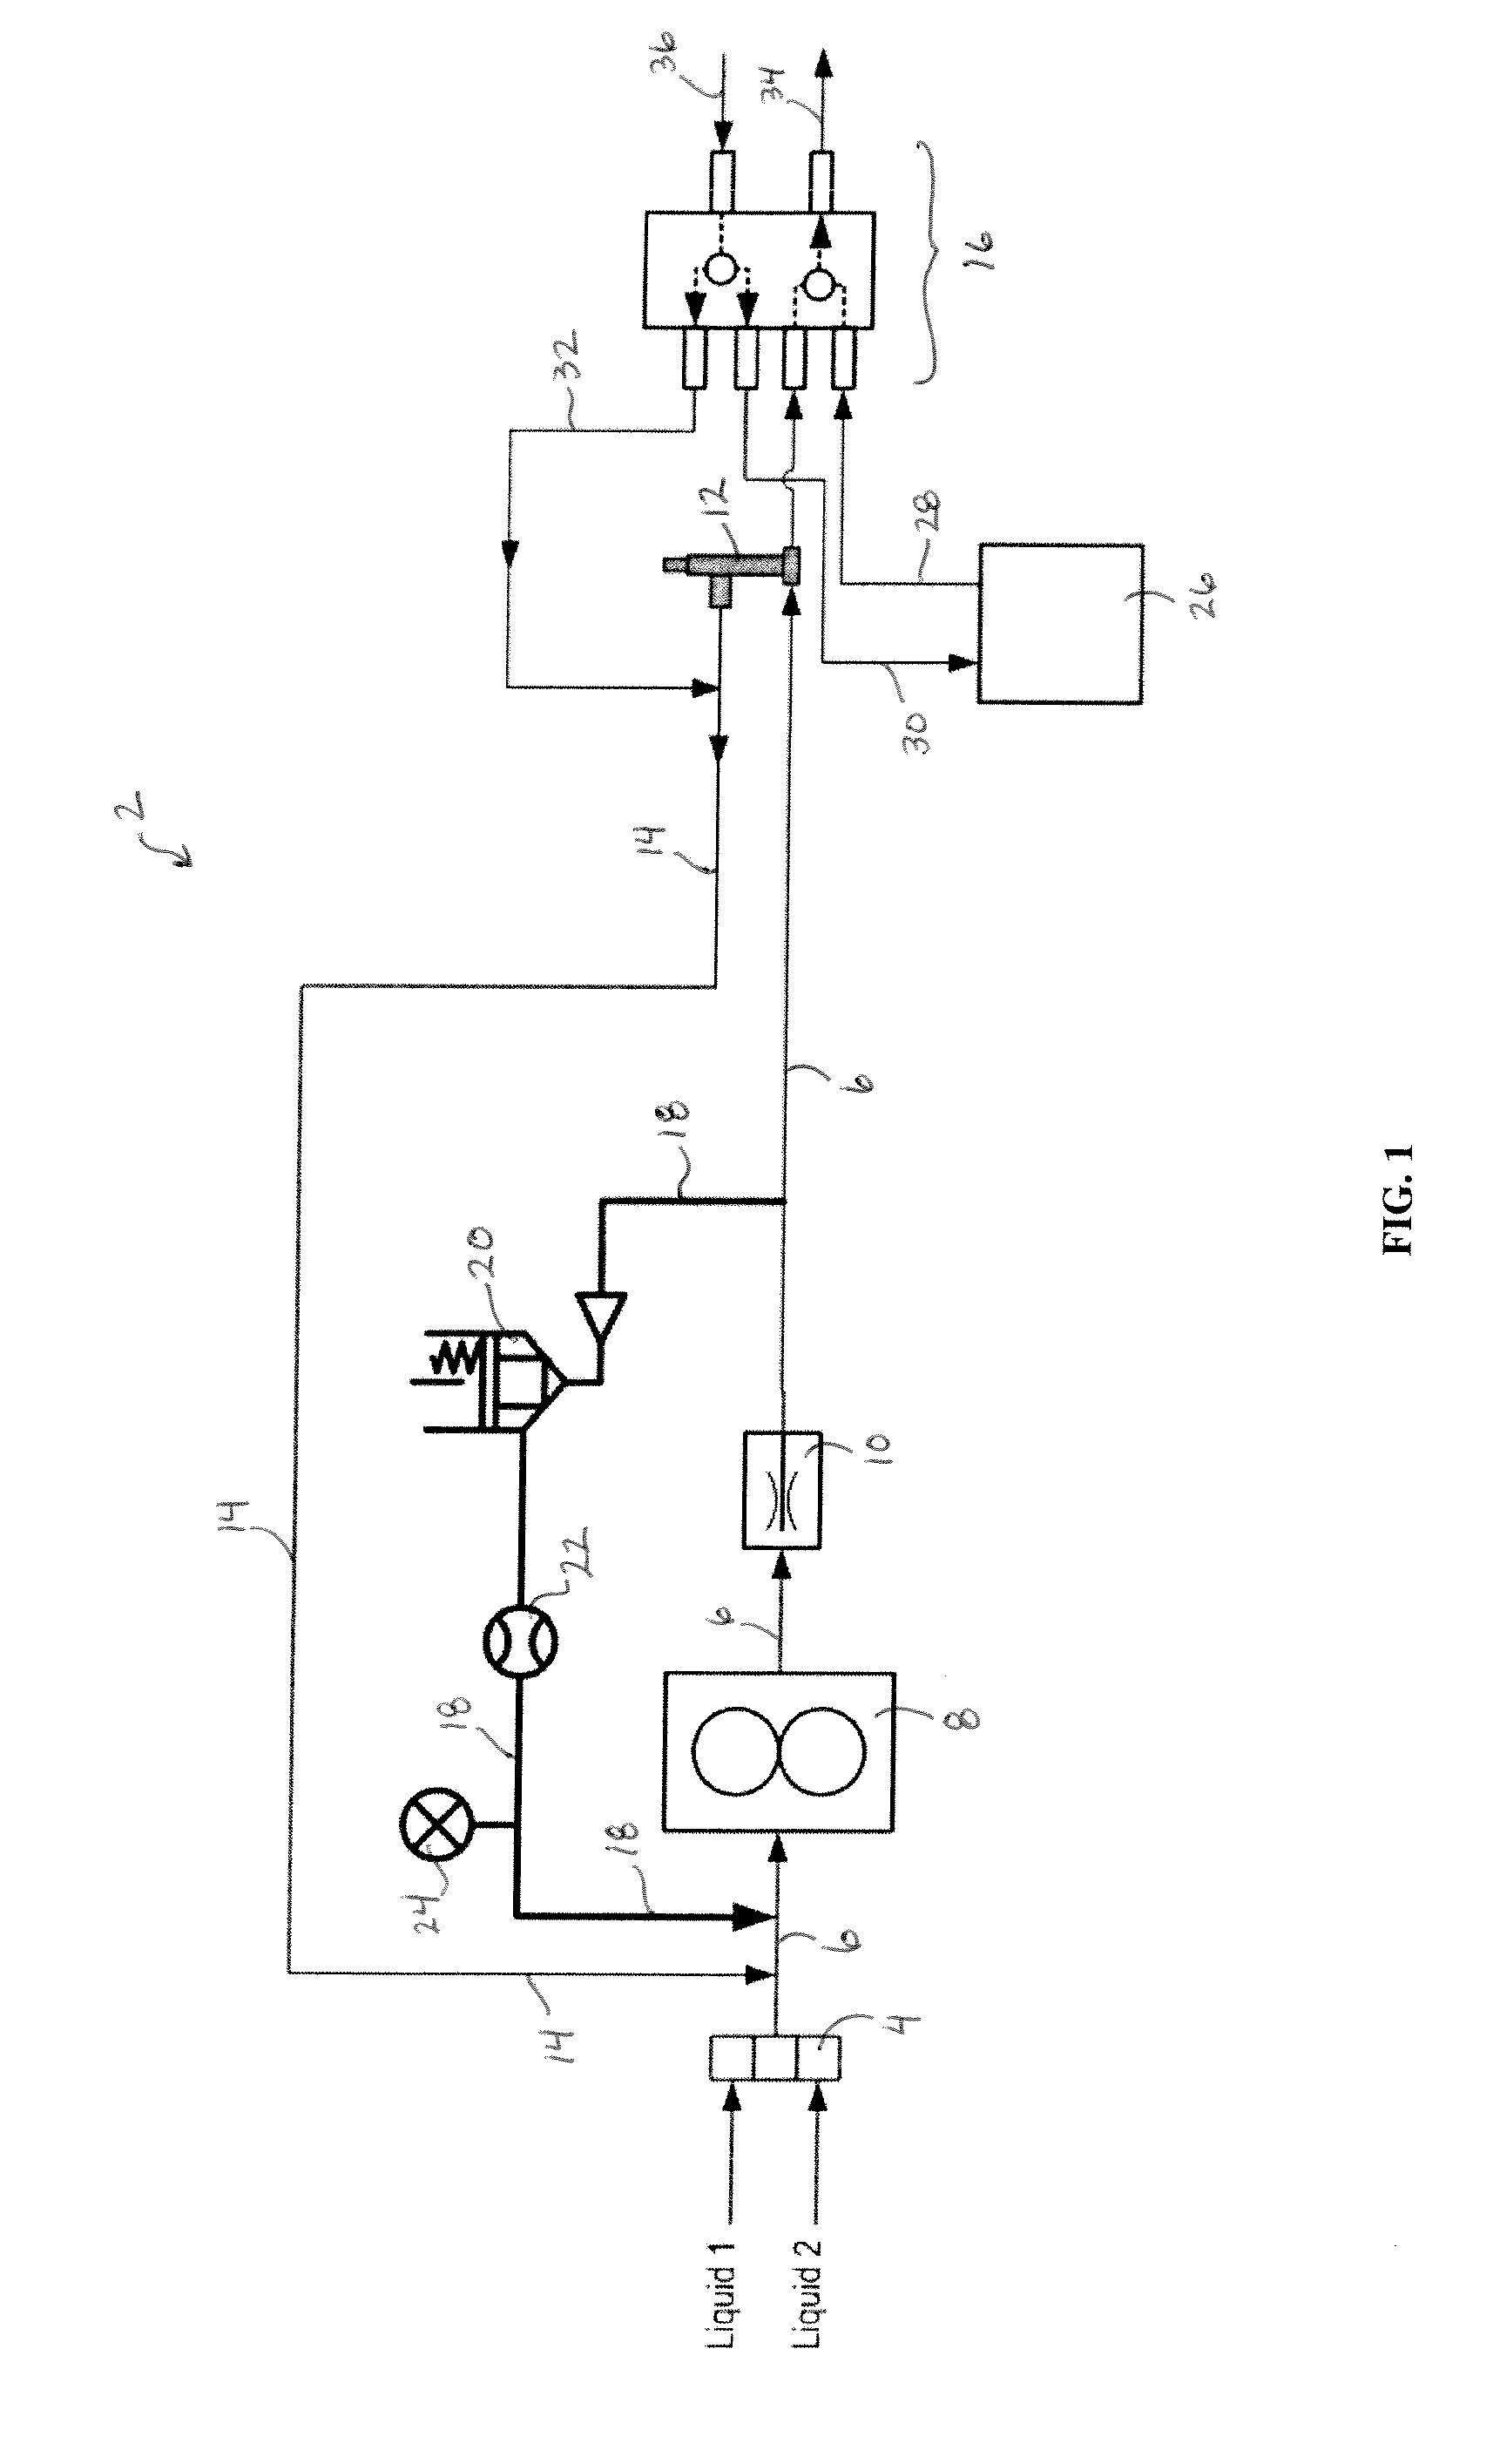 Emulsion-producing hydraulic circuit and method for re-emulsifying a separated liquid